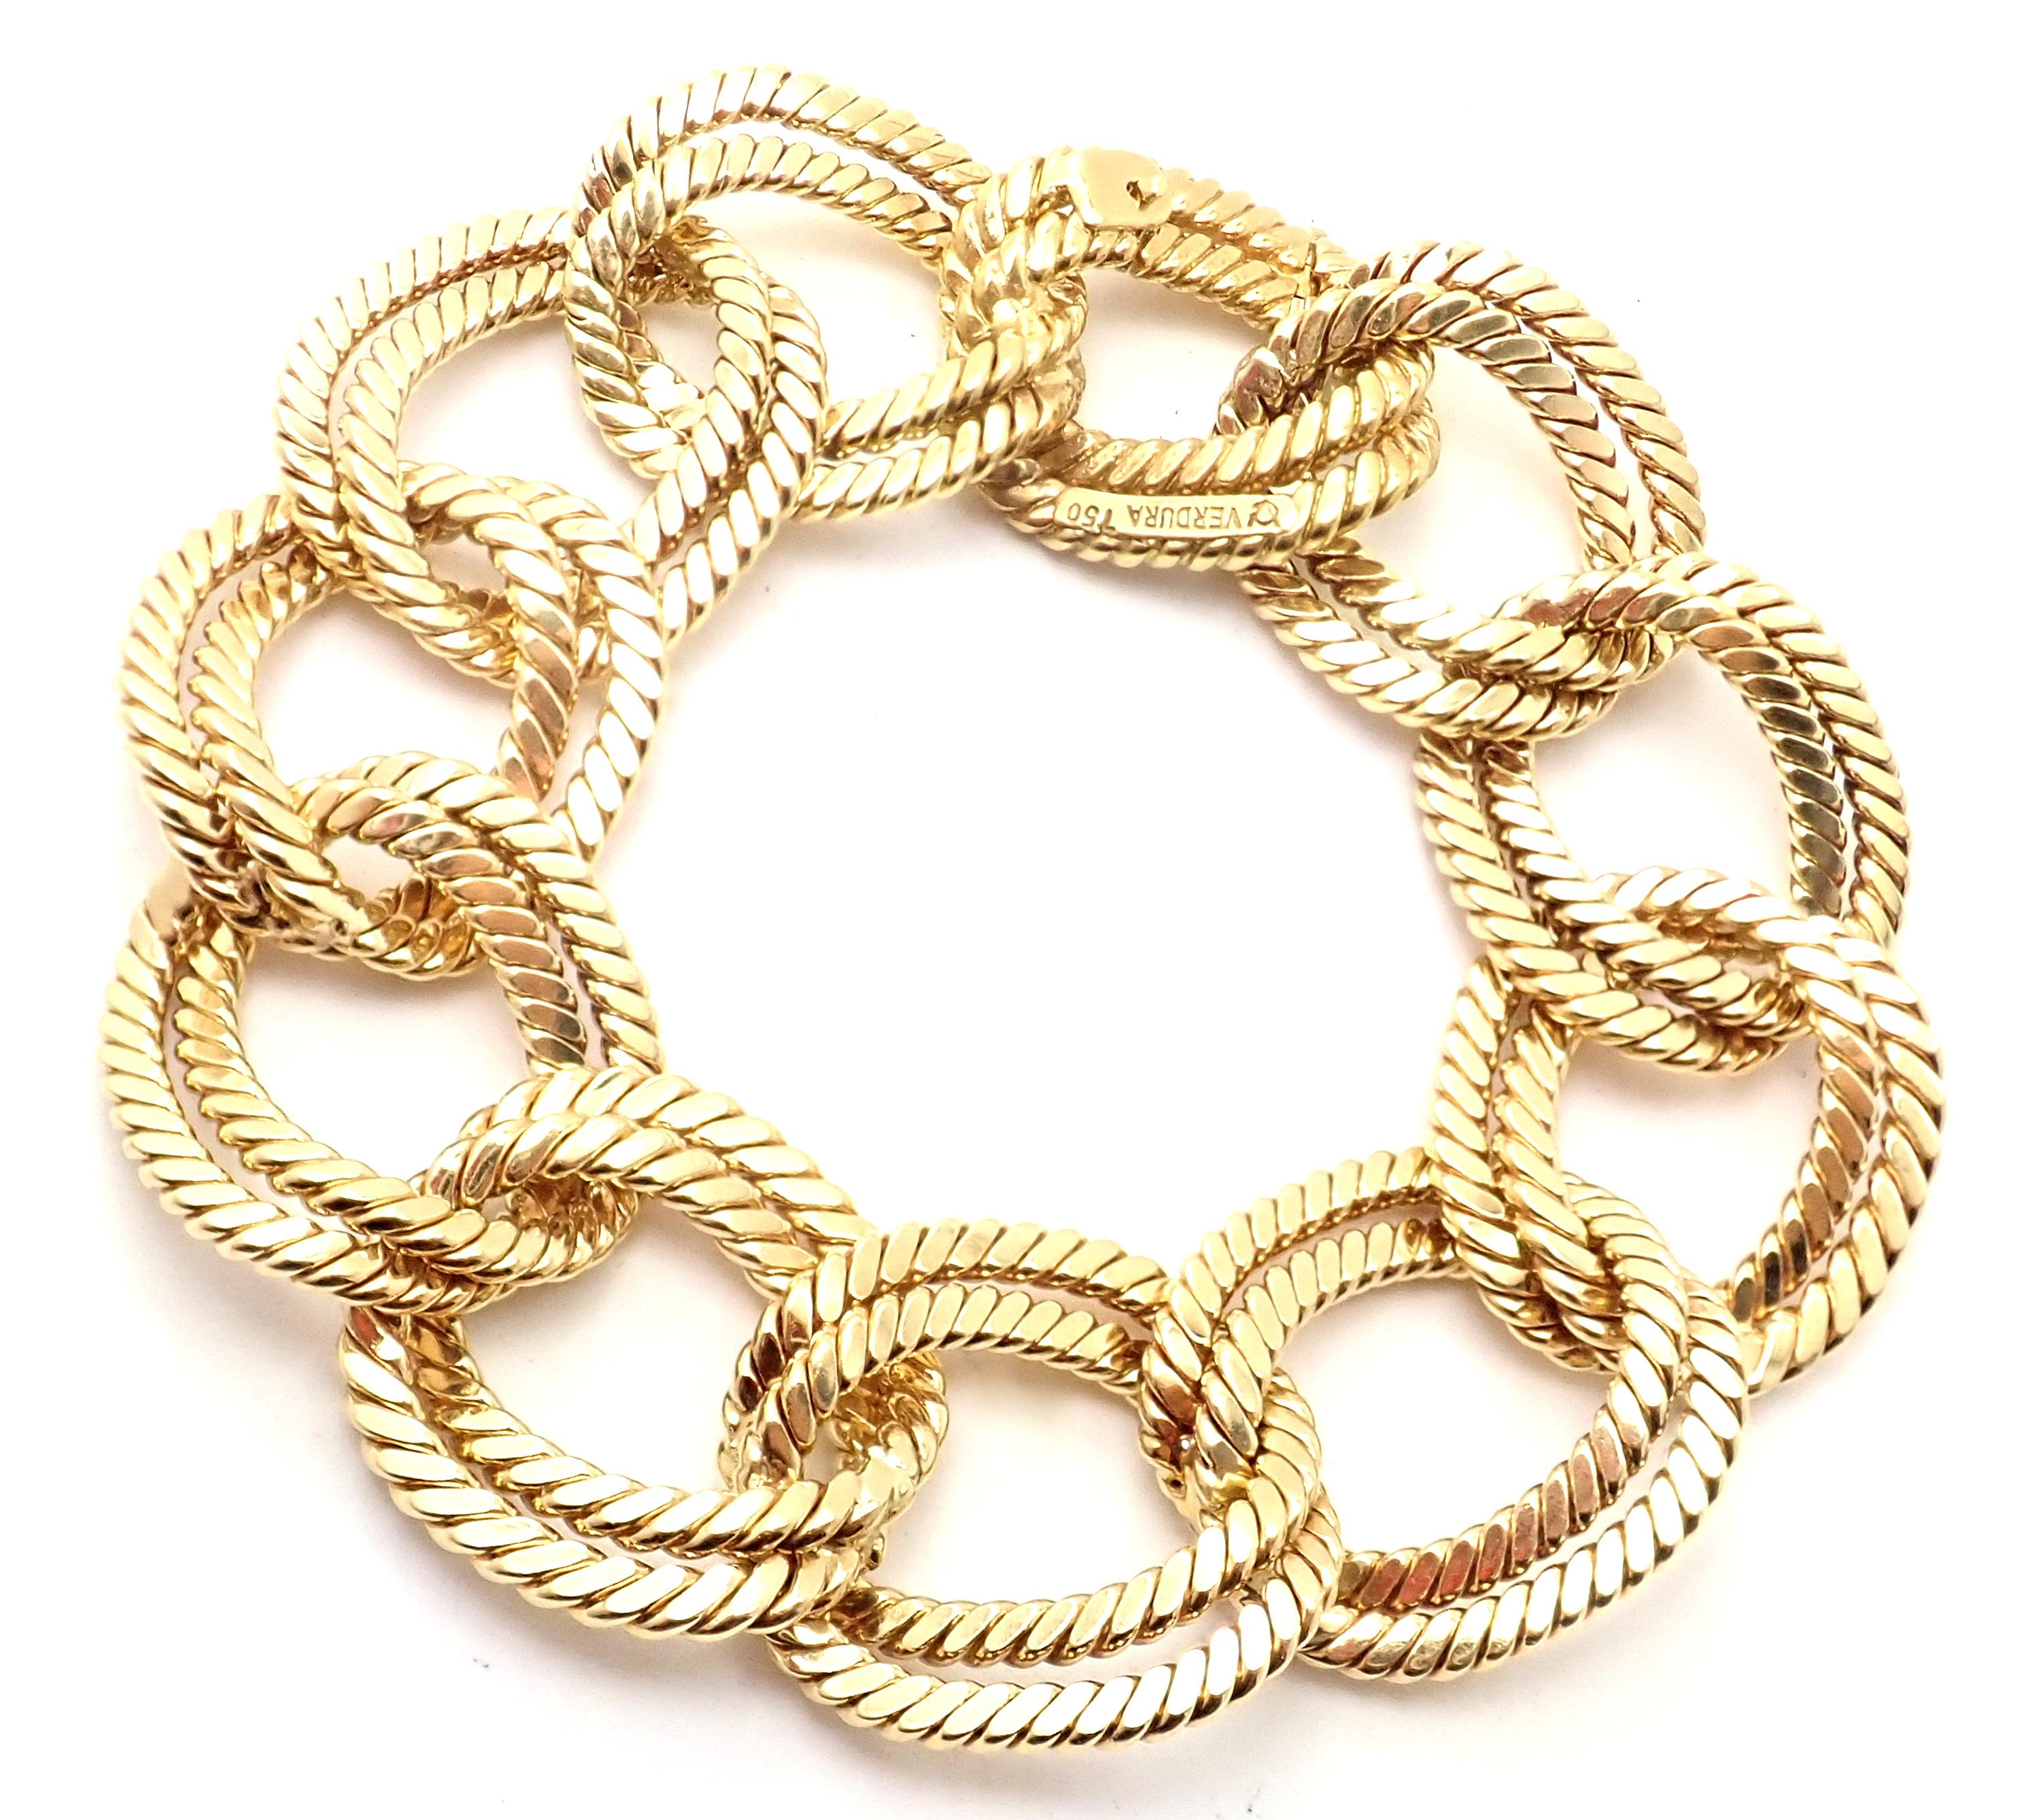 18k Yellow Gold Rope Link Bracelet by Verdura.
Details: 
Weight: 73.6 grams
Length: 7.5